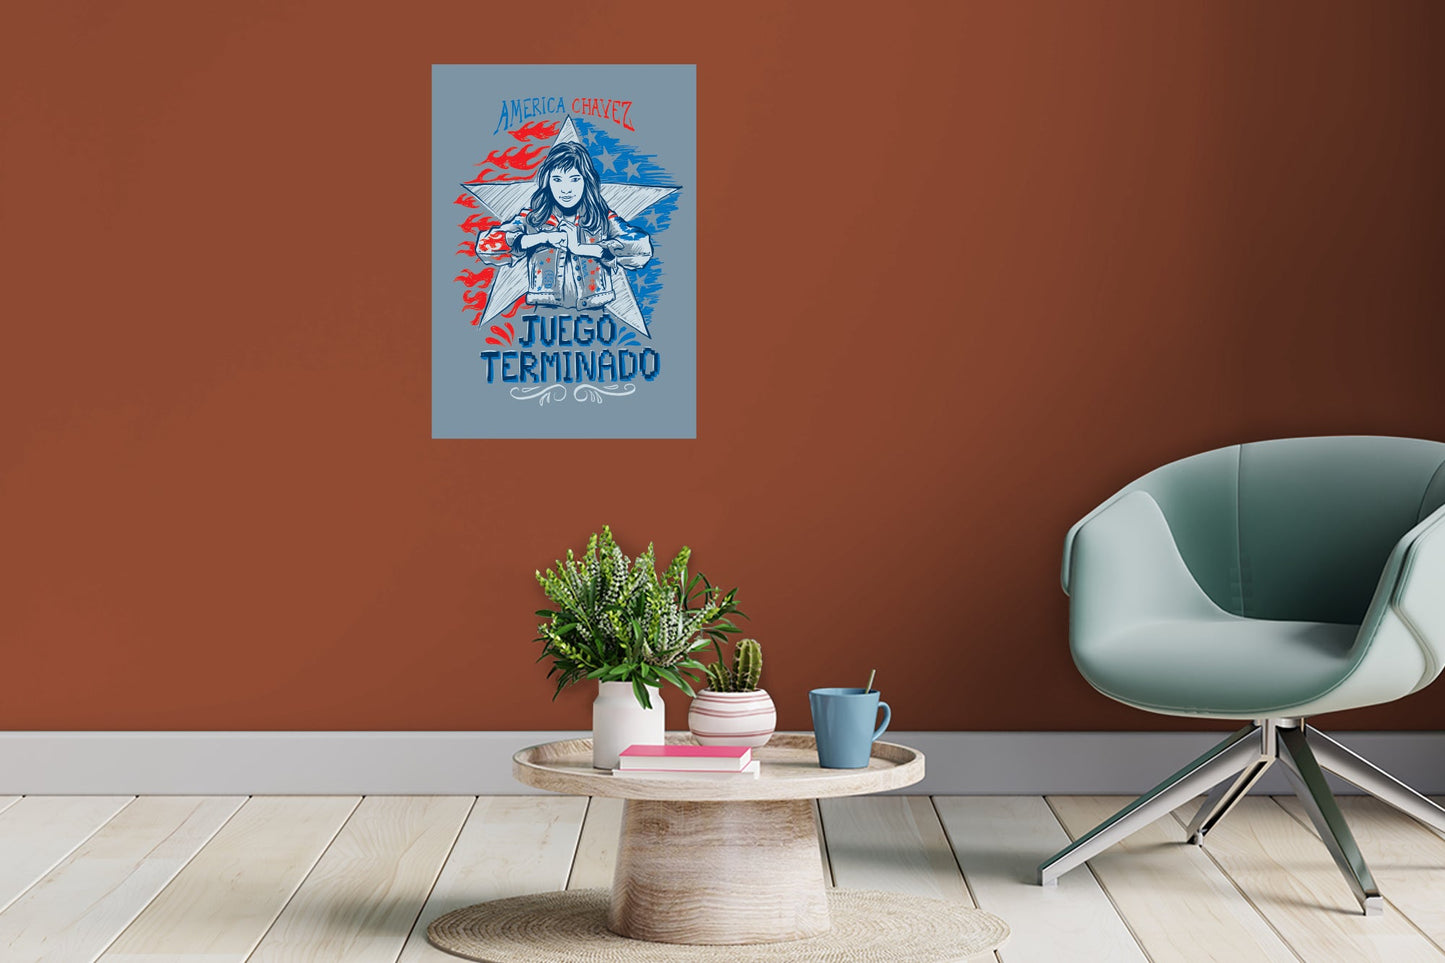 Doctor Strange 2: In the Multiverse of Madness: America Chavez Poster - Officially Licensed Marvel Removable Adhesive Decal